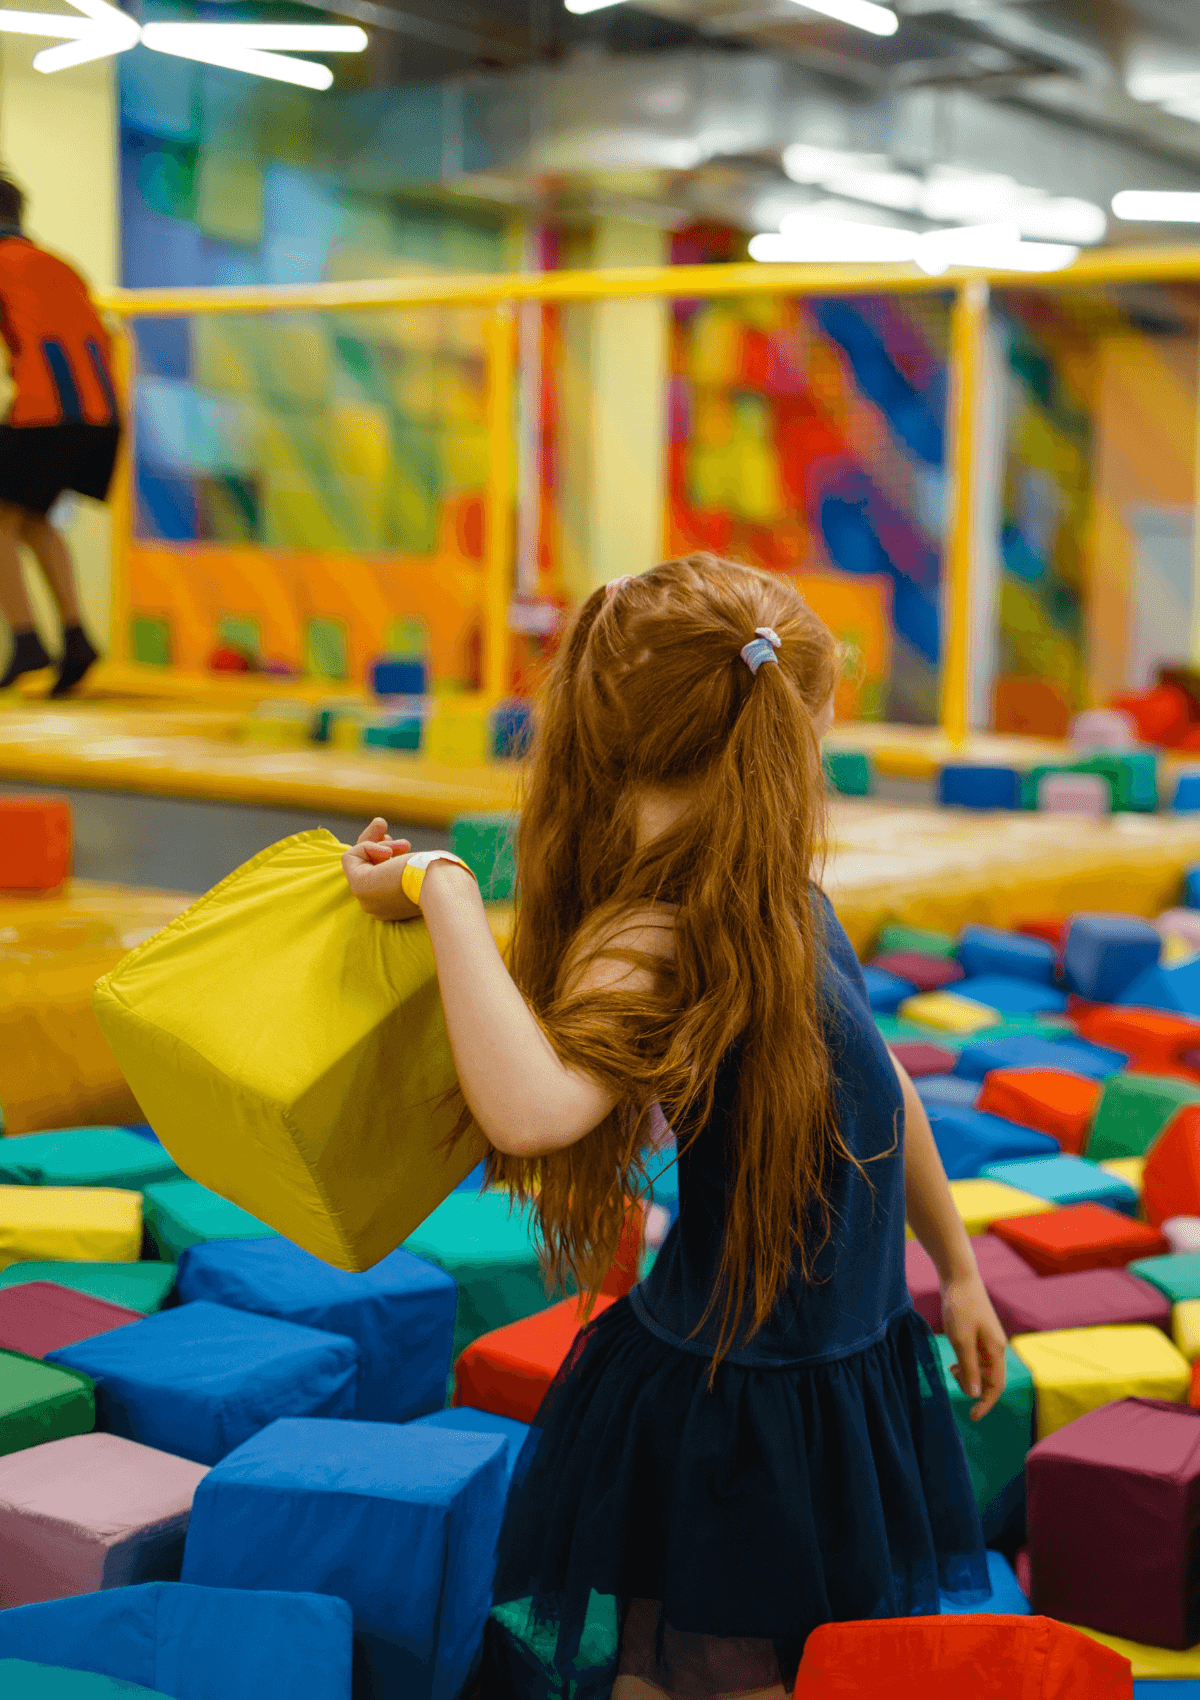 Soft play area, days out for kids in England